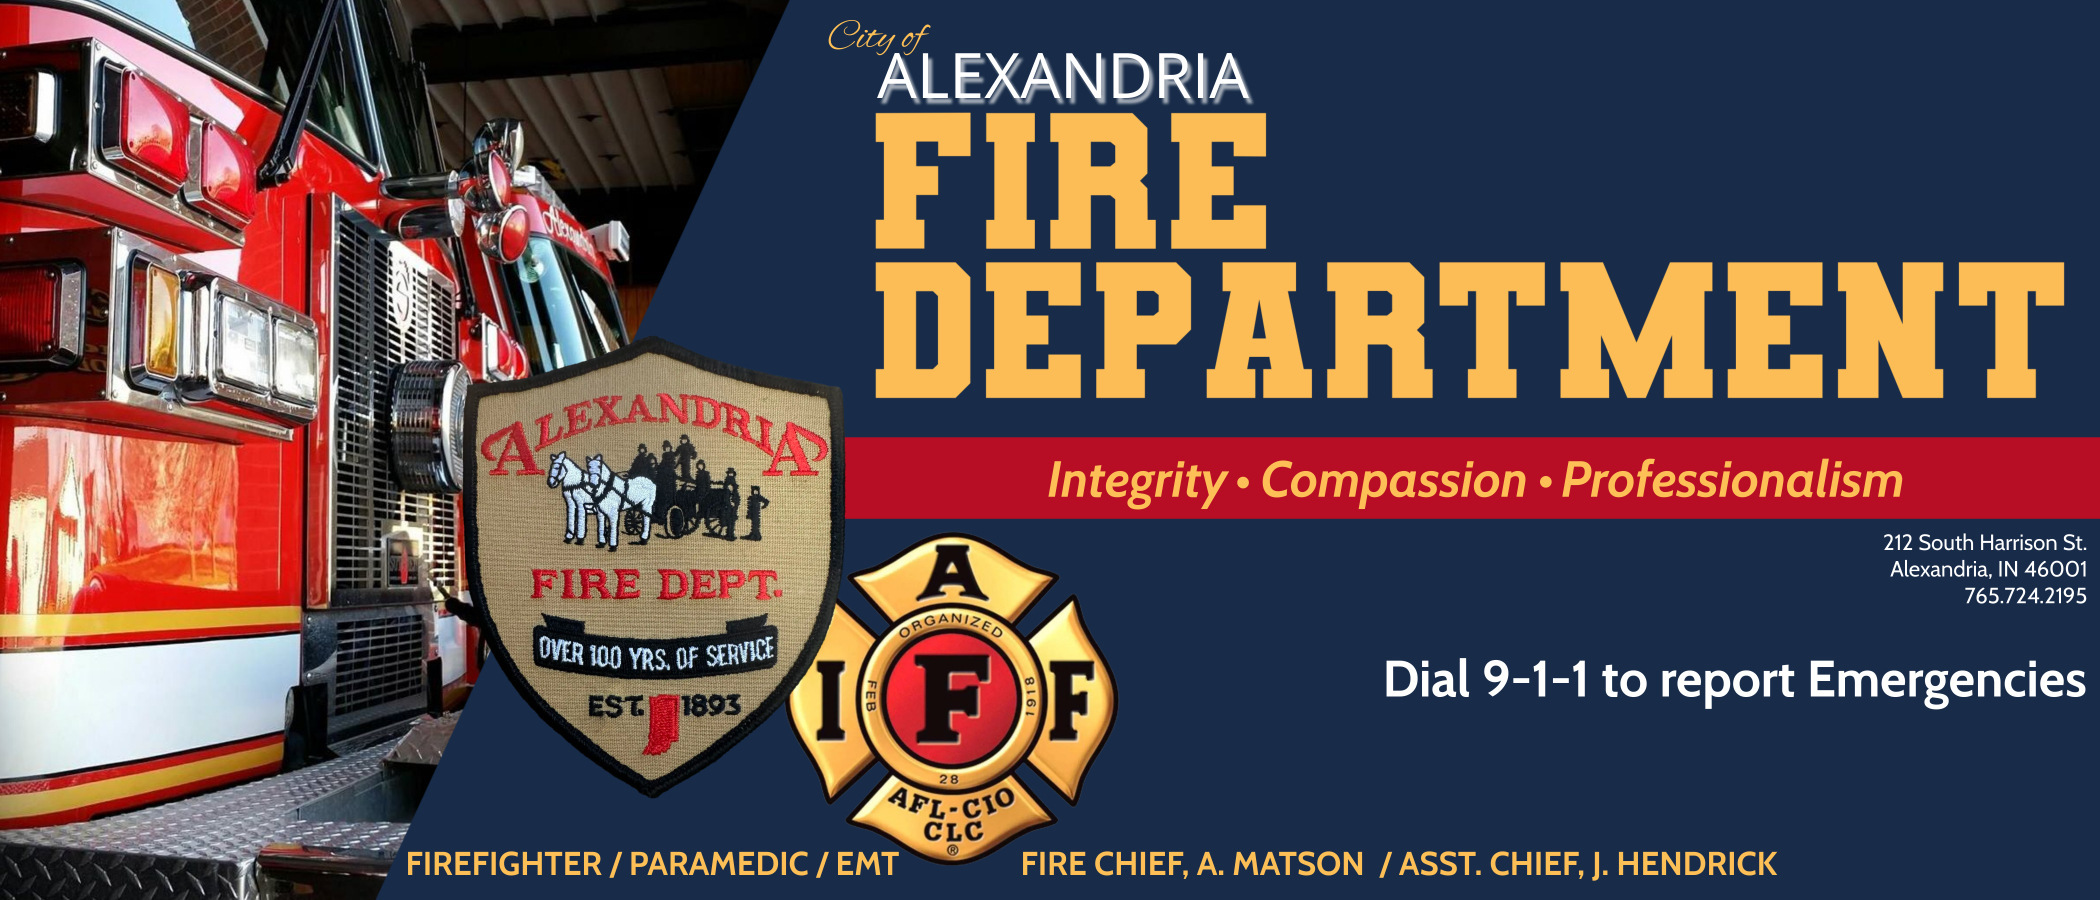 City of Alexandria Fire Department. 212 South Harrison St. Alexandria, IN 46001. 765-724-2195. A. Matson Is the fire chief, and J. Hendrick is the assistant chief. Dial 9-1-1 for emergencies. We are proud to serve Monroe Township.